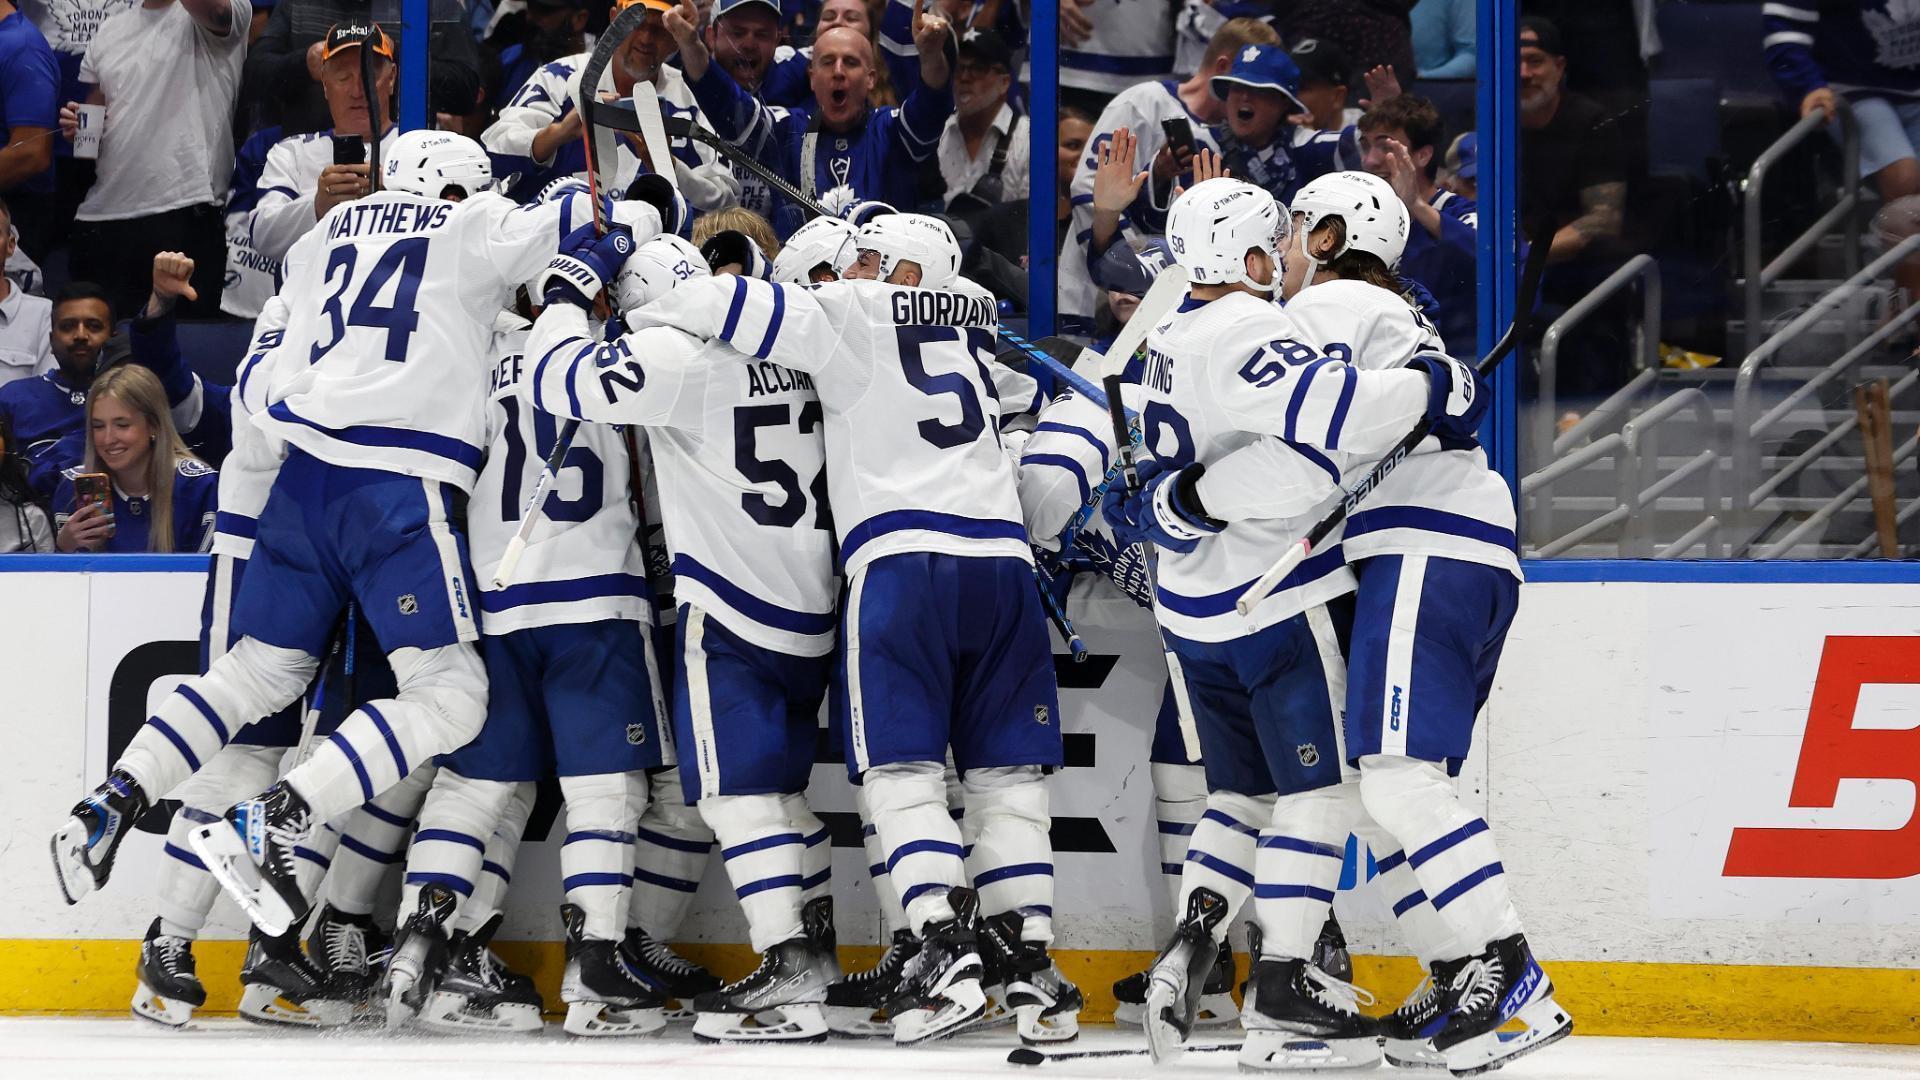 Reliving the New Jersey Devils playoff success vs. Toronto Maple Leafs